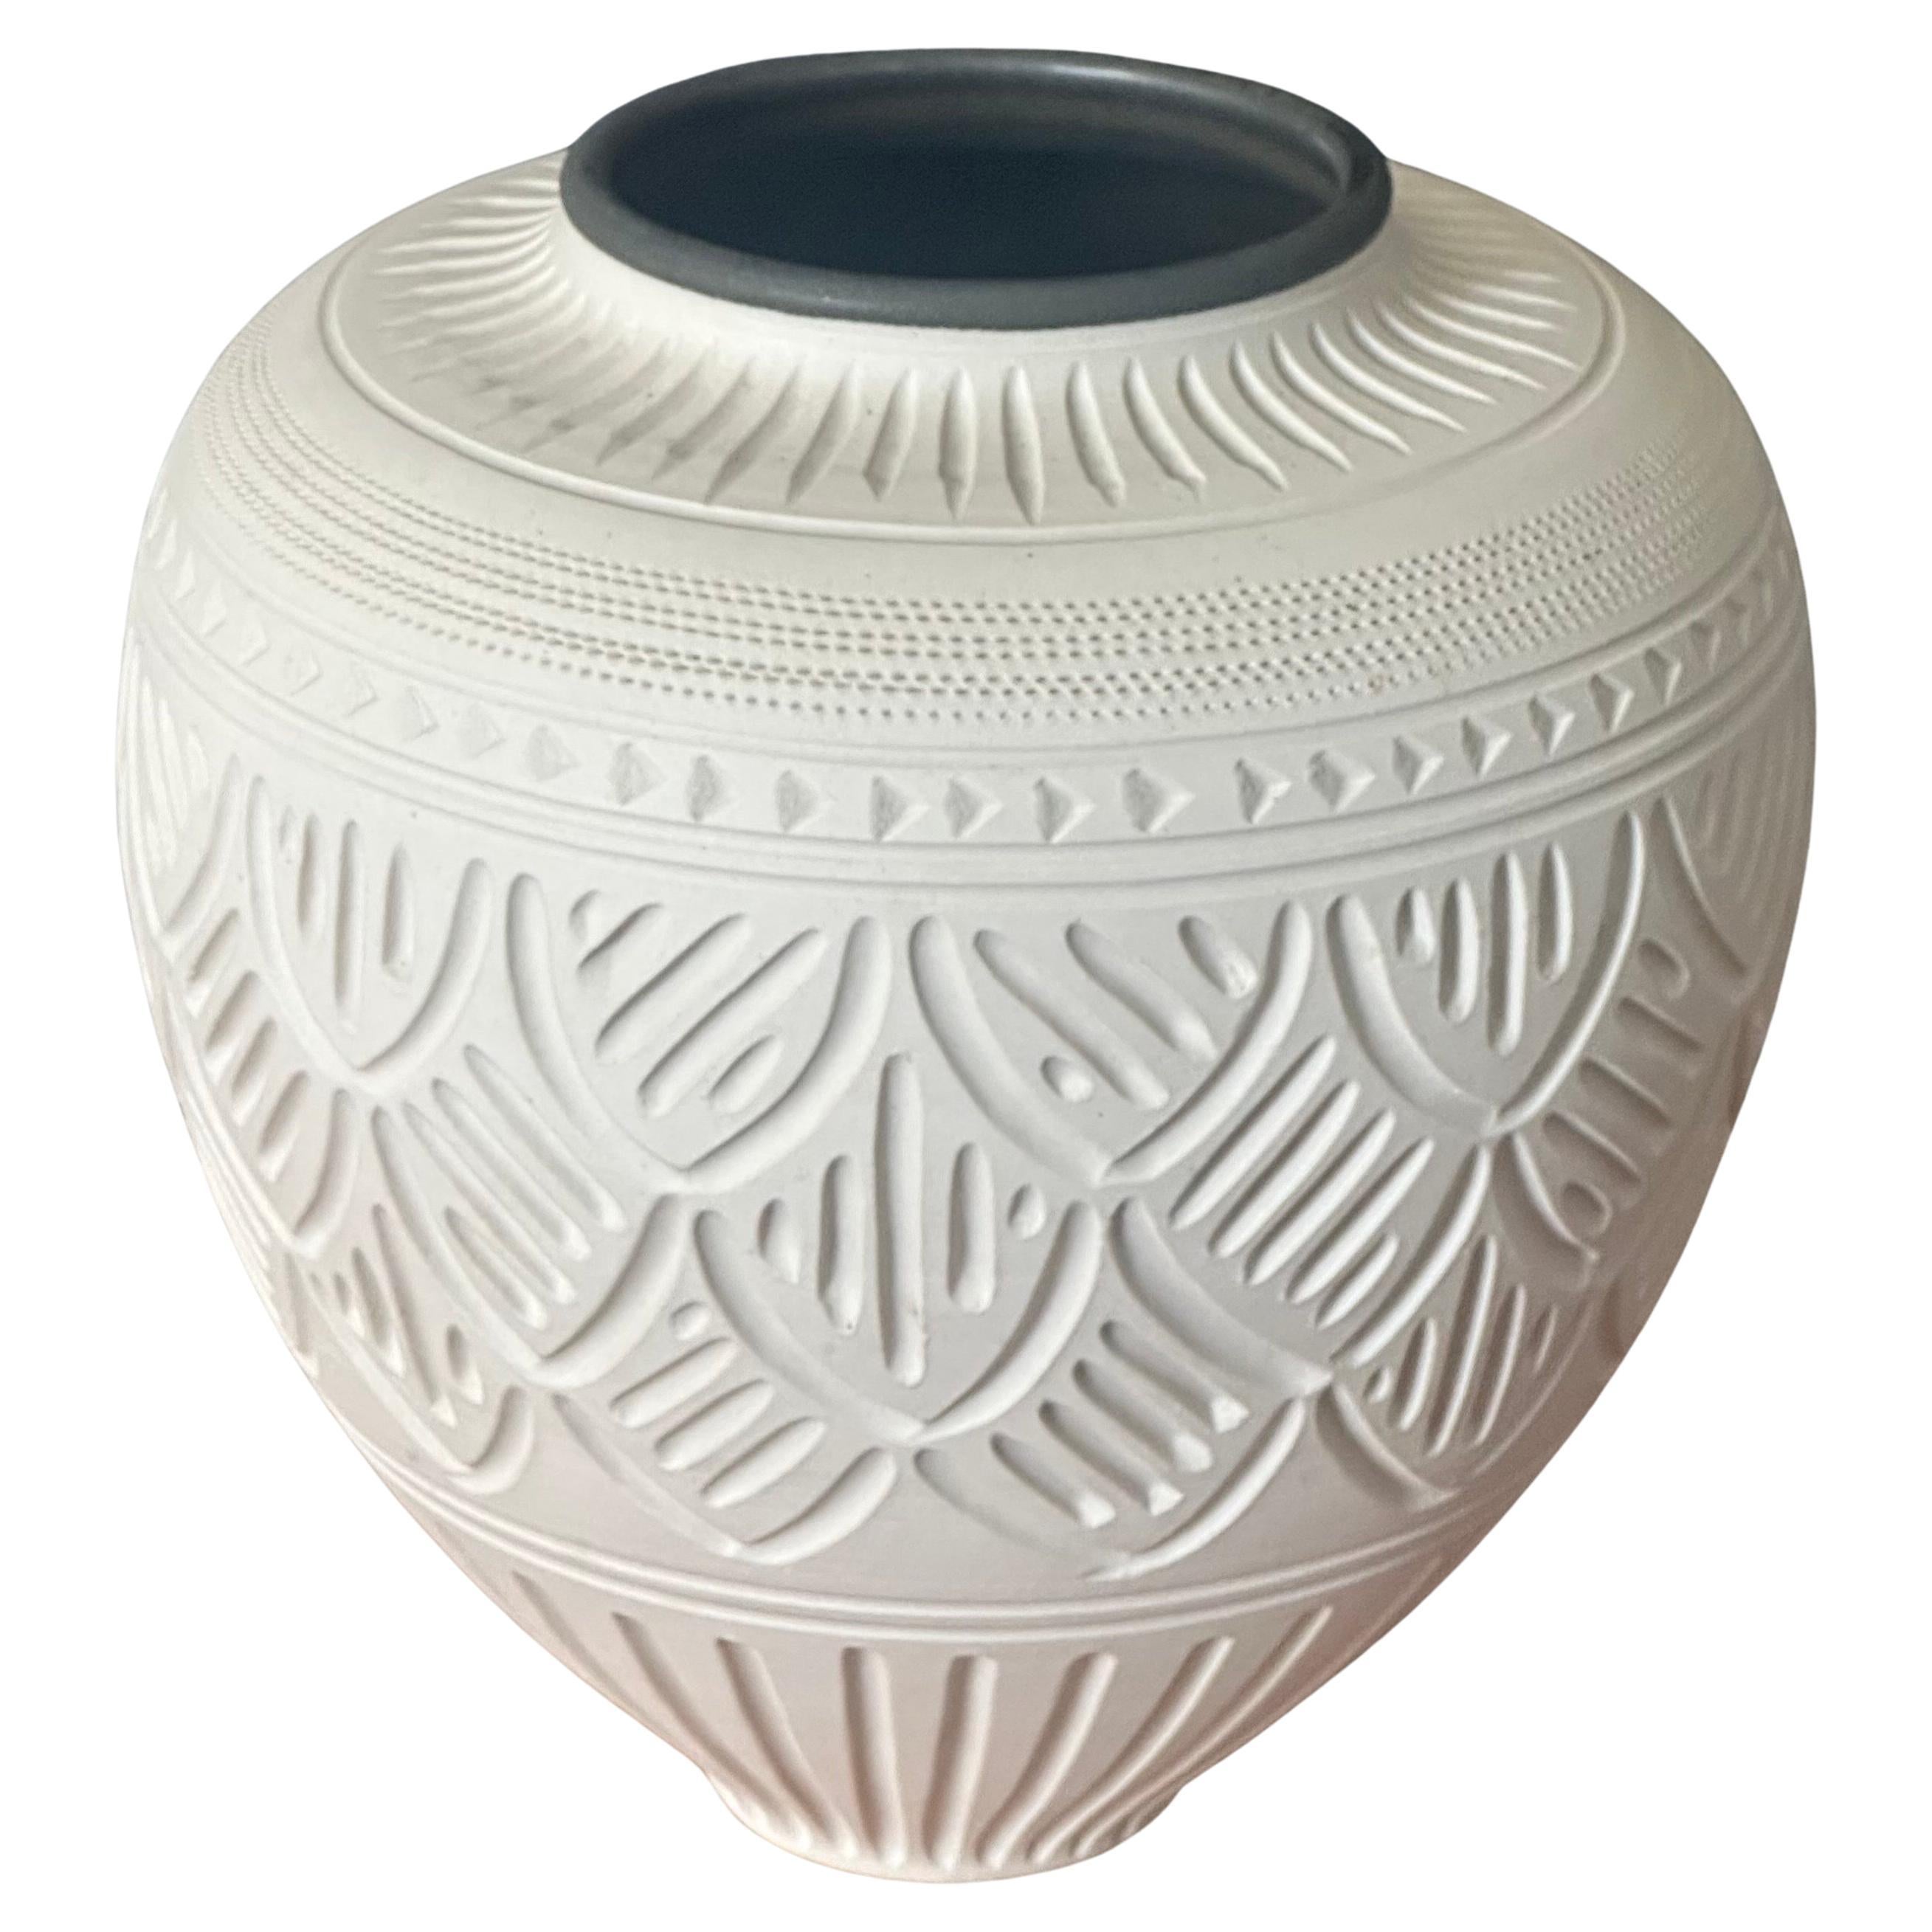 Simply gorgeous incised geometric design bisque porcelain vase by Nancy Smith, circa 1990s The vase has a black lining to the lip of the vase as is quite attractive.  It is in very good vintage condition with no chips or cracks and measures 7.75